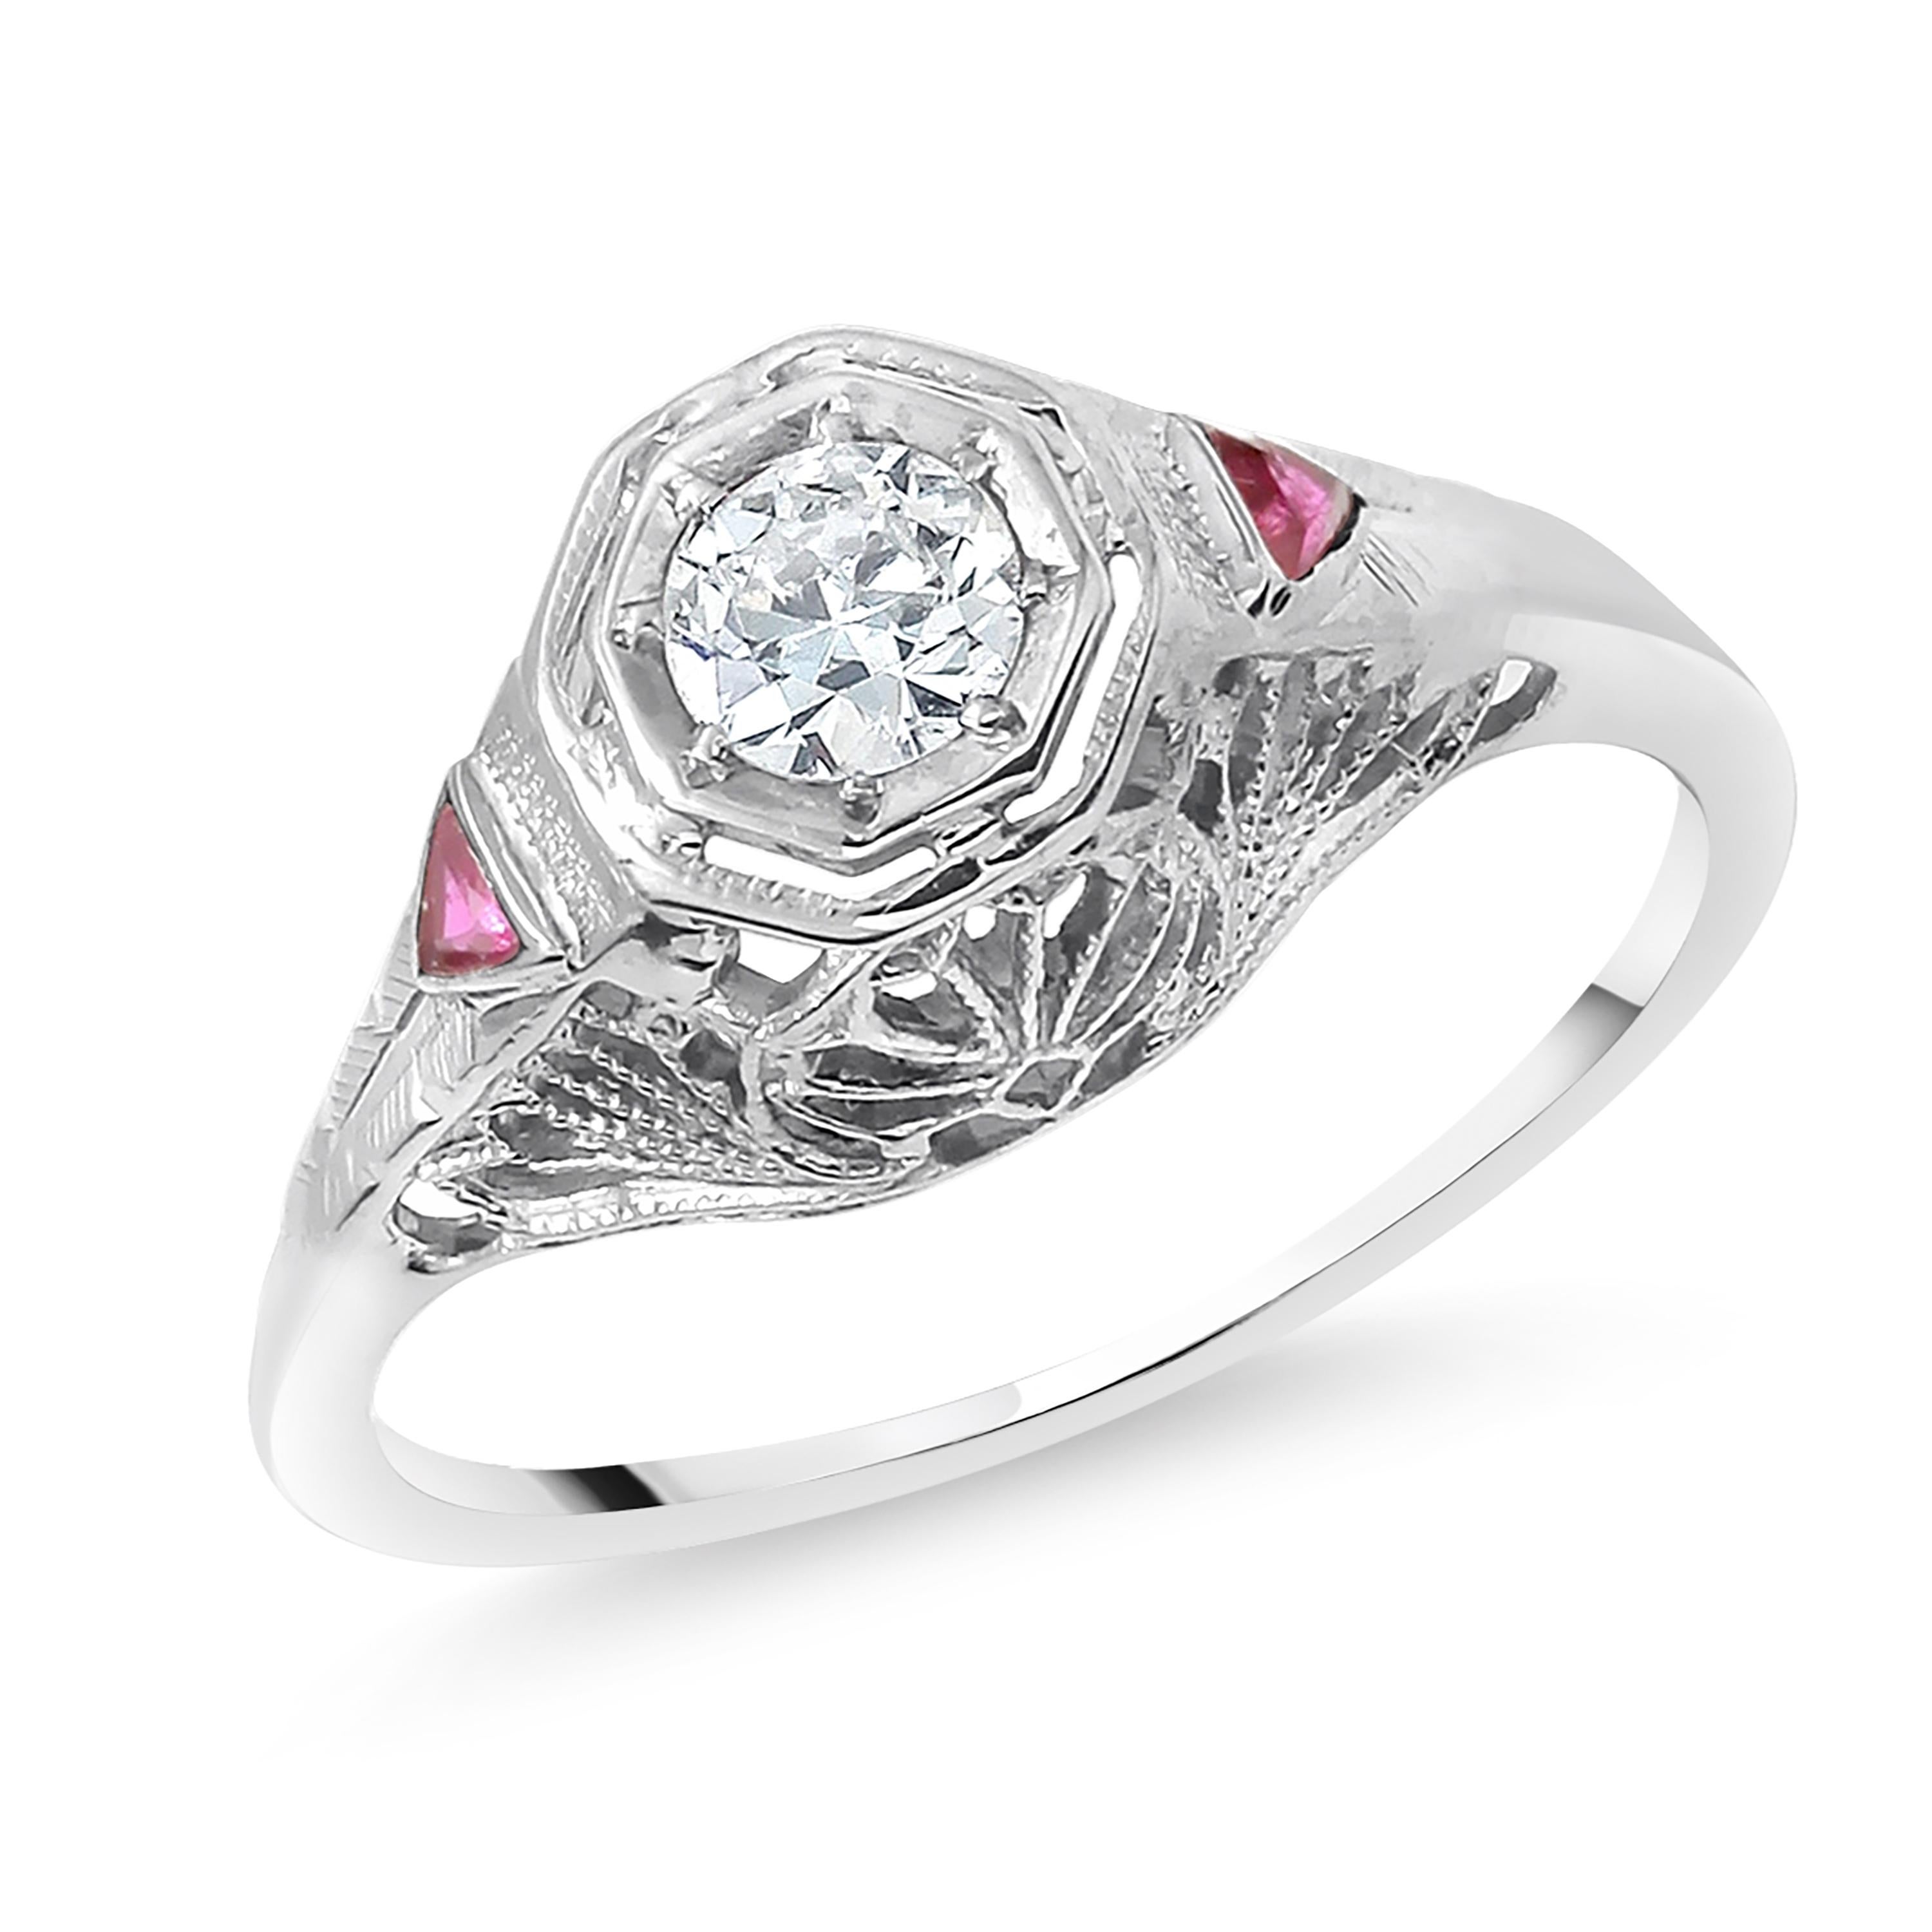 Round Cut Art Deco Diamond and Ruby White Gold Engagement Ring